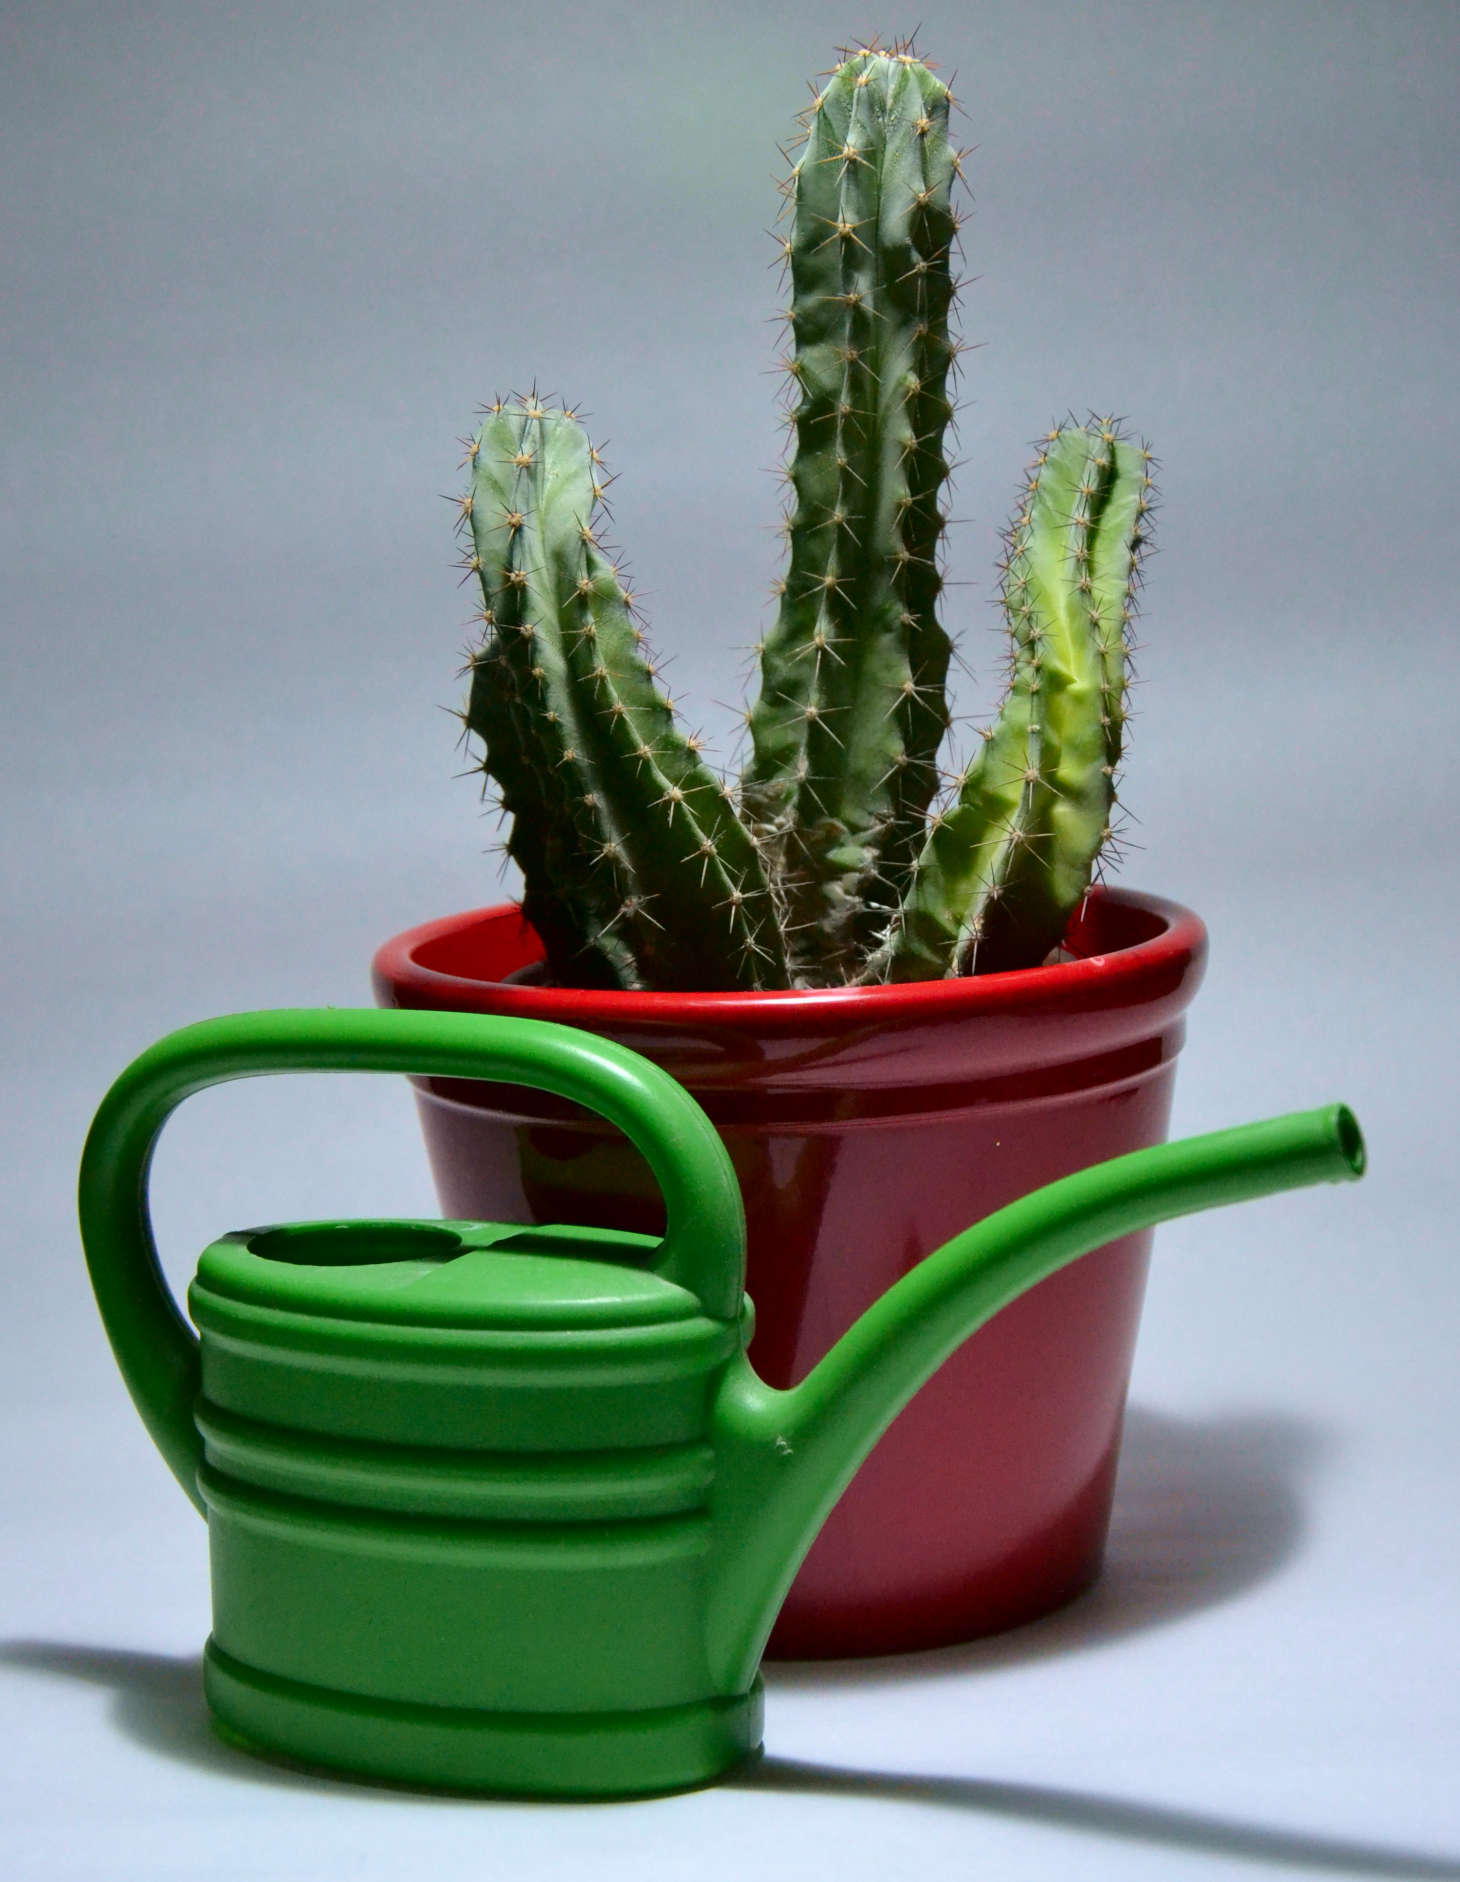 cactus and a watering can